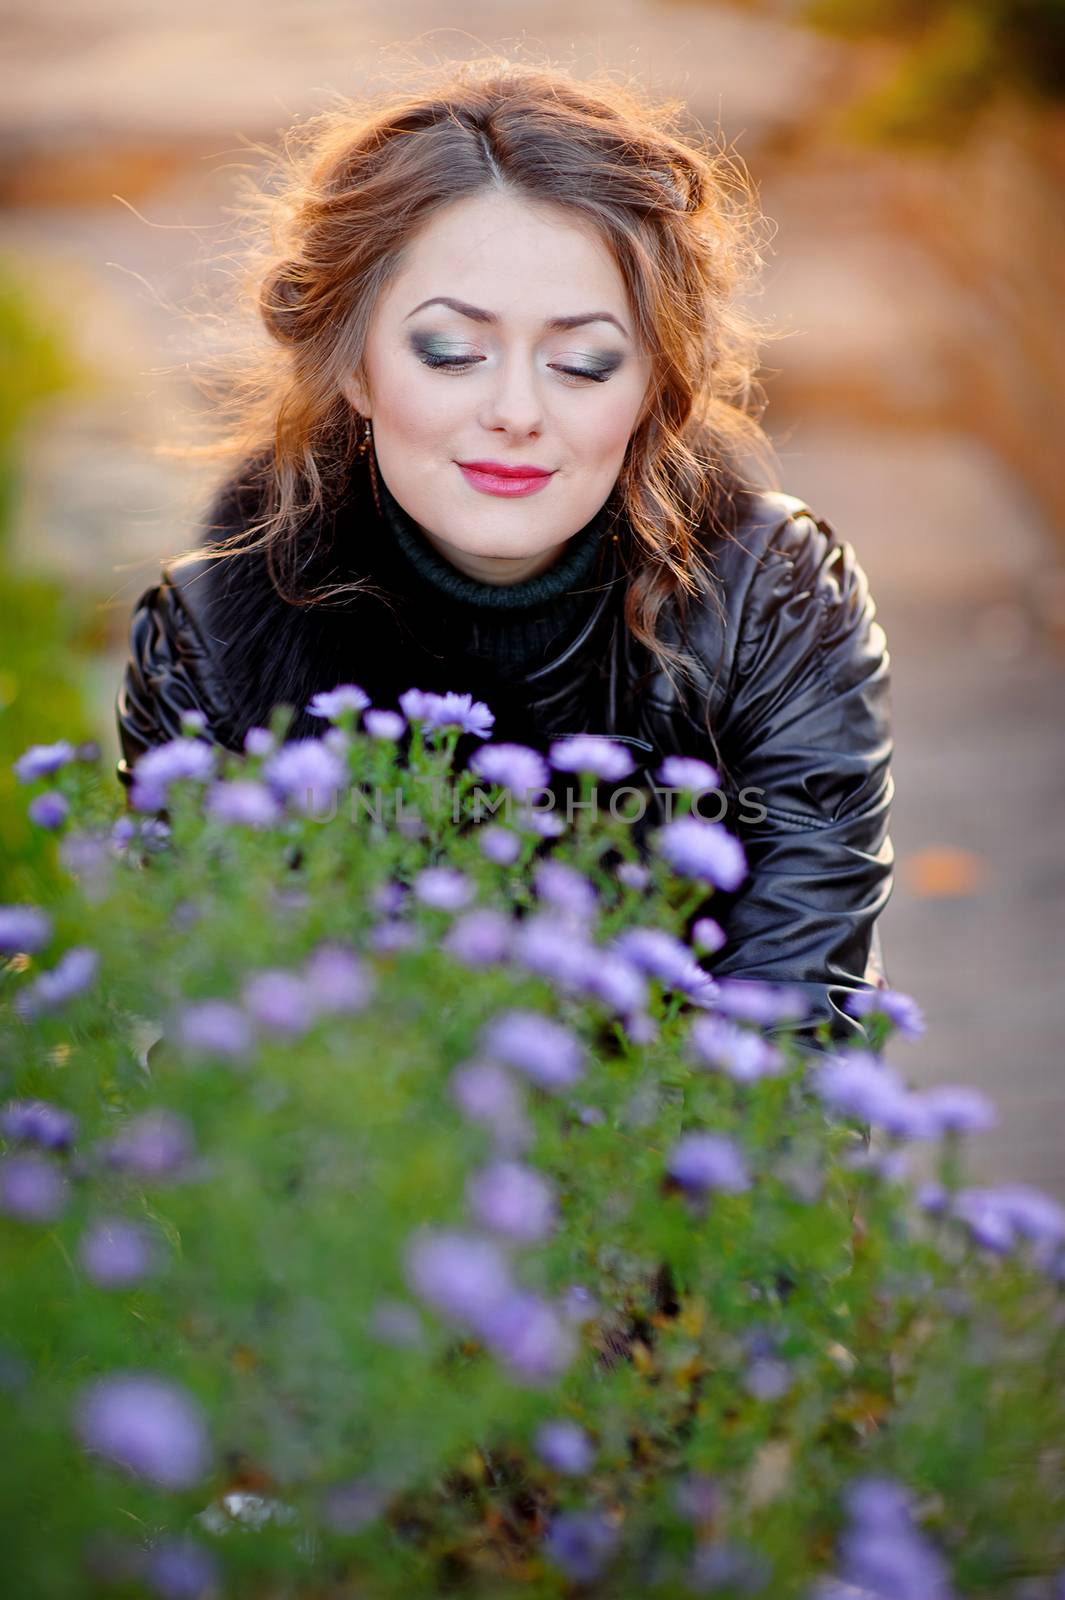 Portrait of a young beautiful woman smiling outdoors looking at flowers